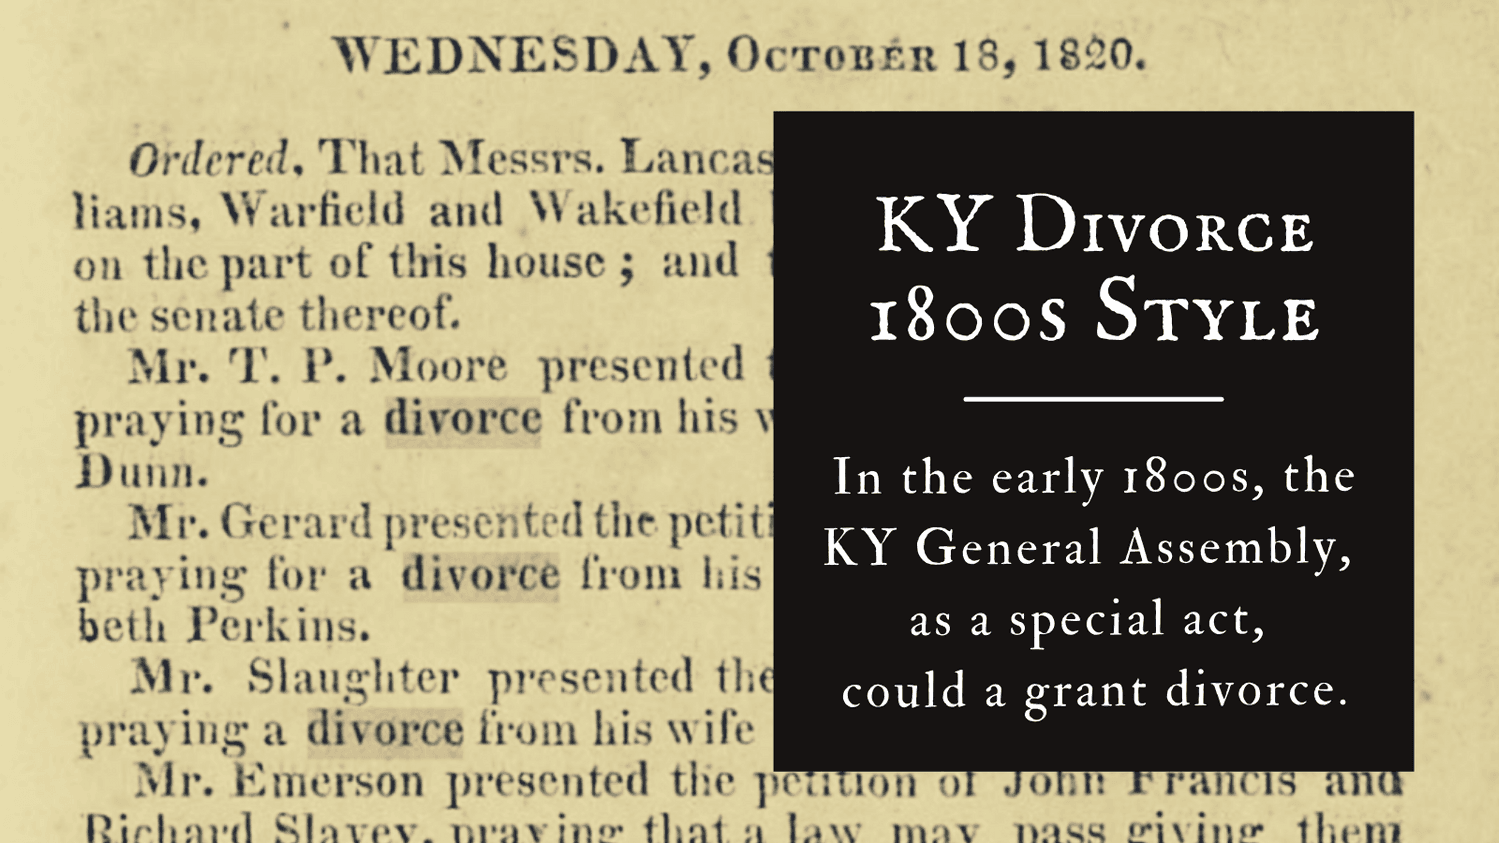 Researching Kentucky Divorces in the Early 1800s